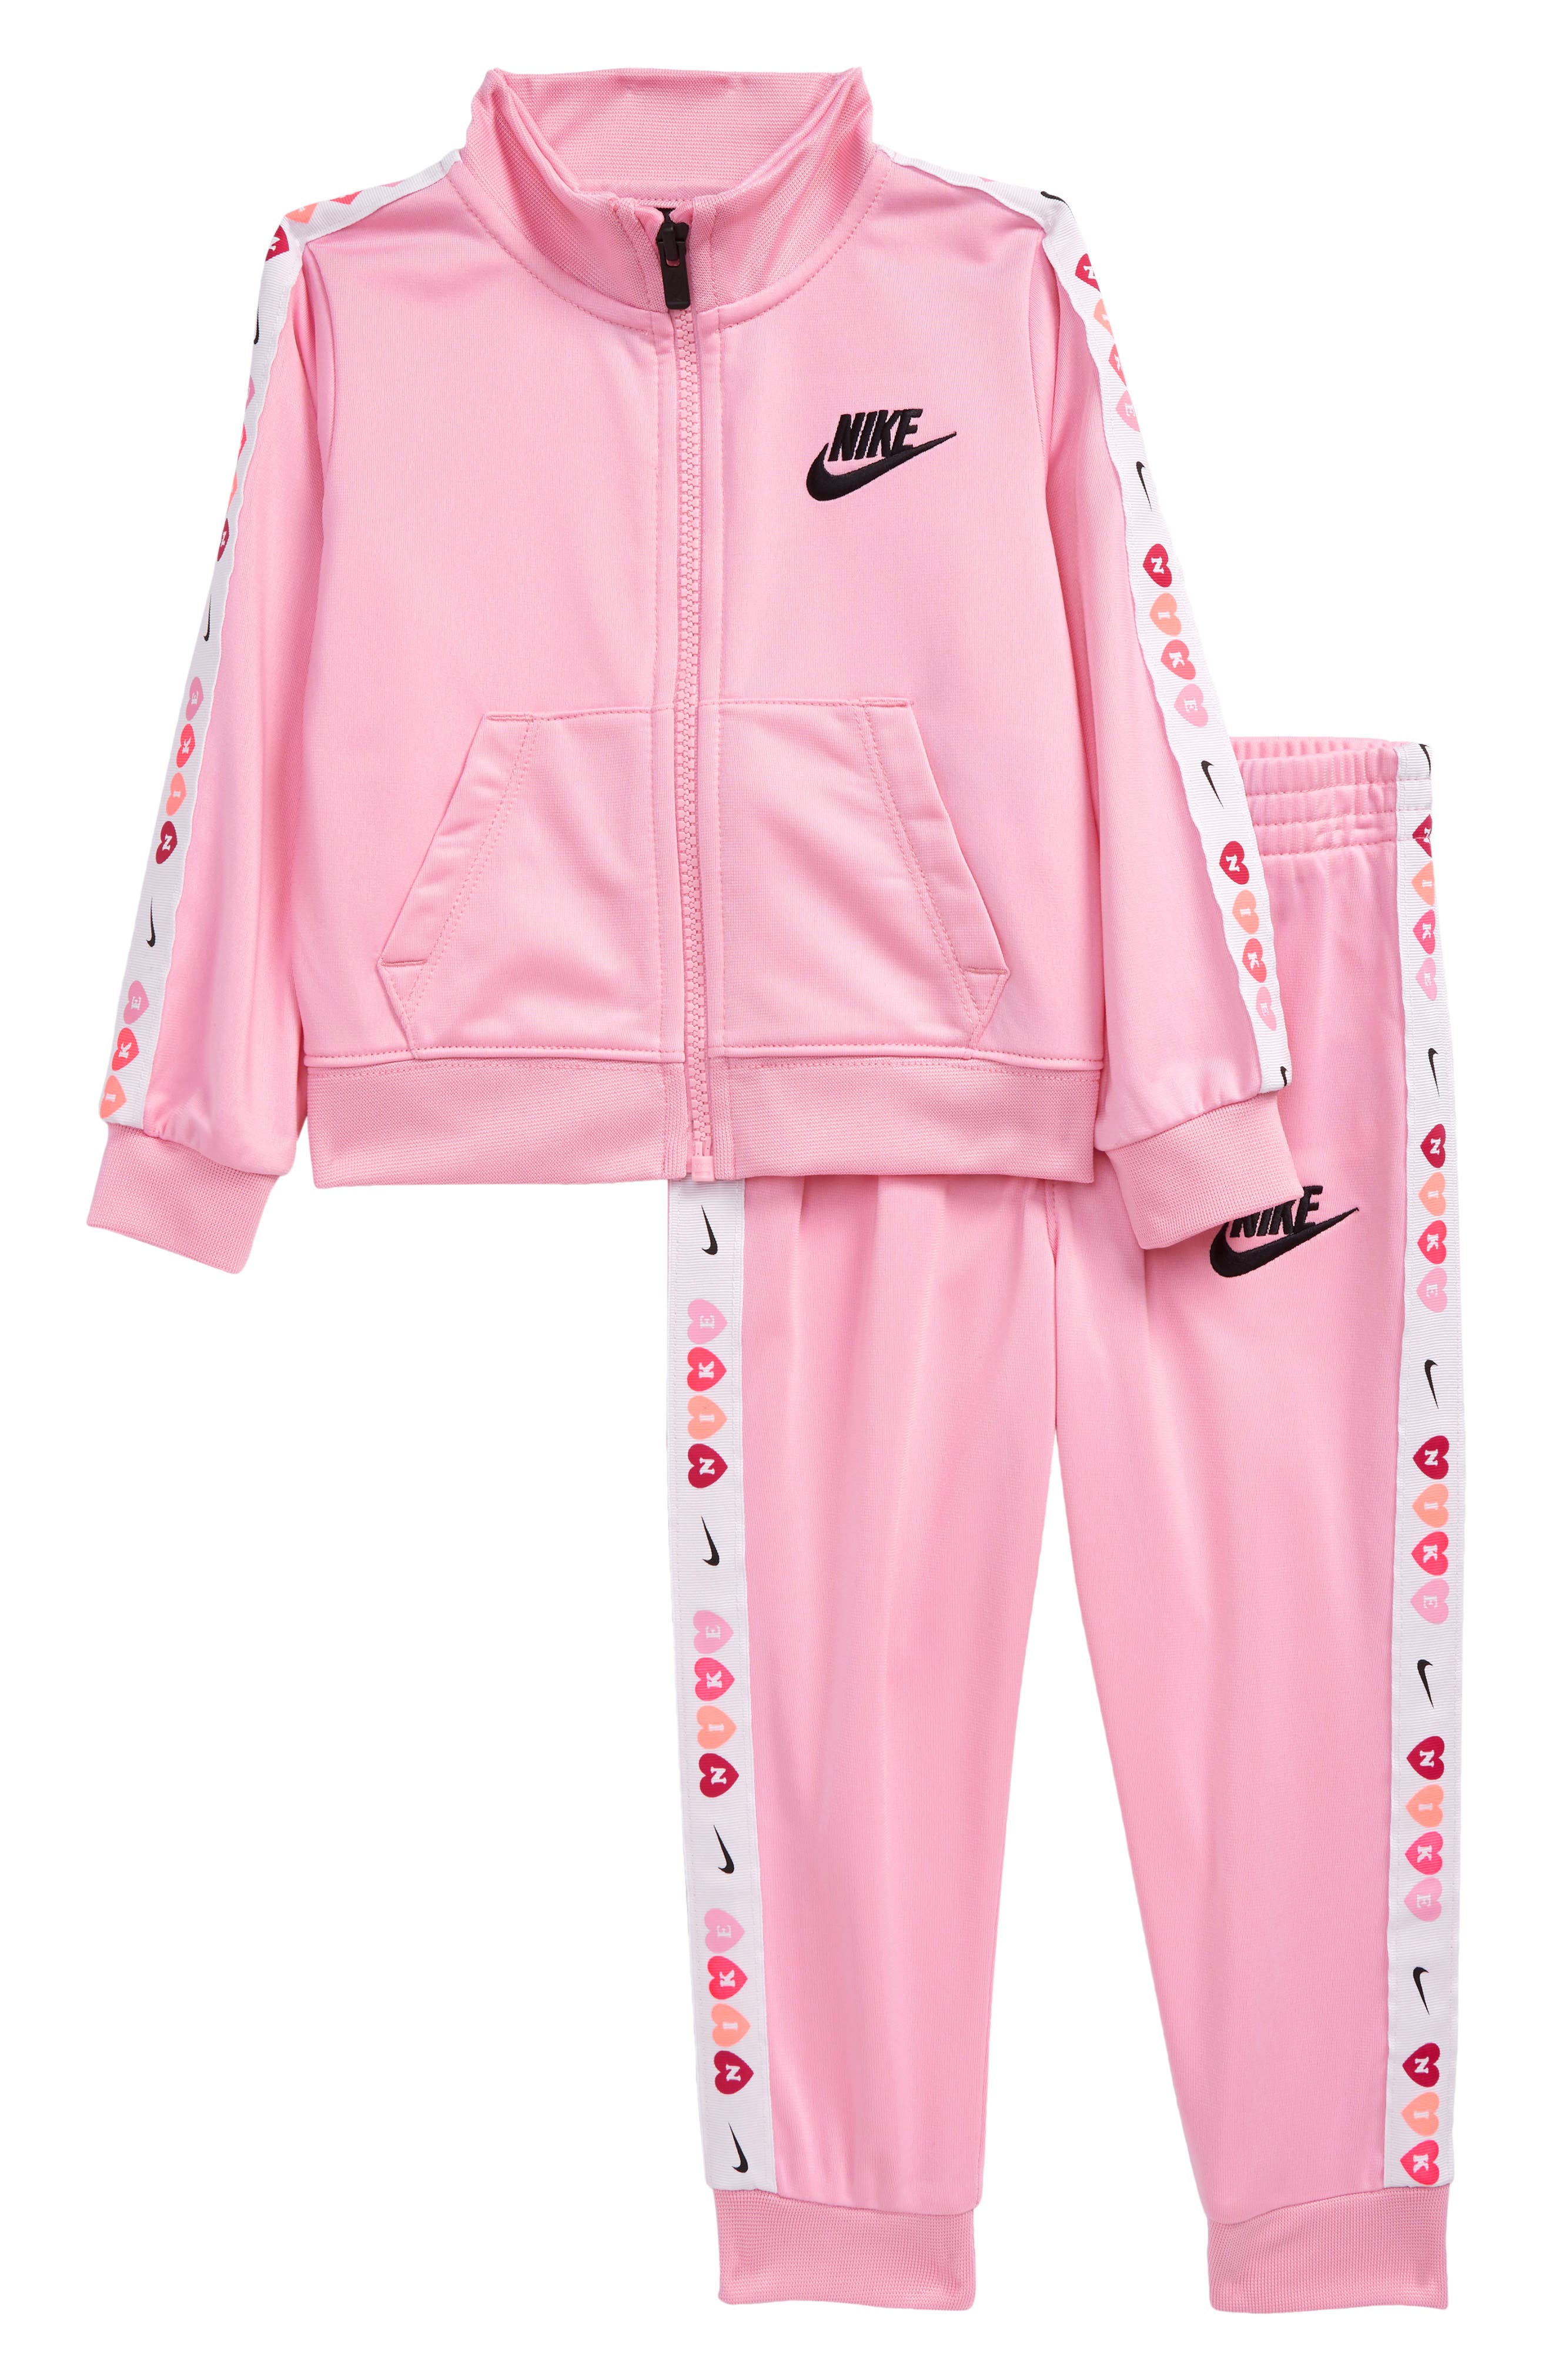 pink nike sweat outfit